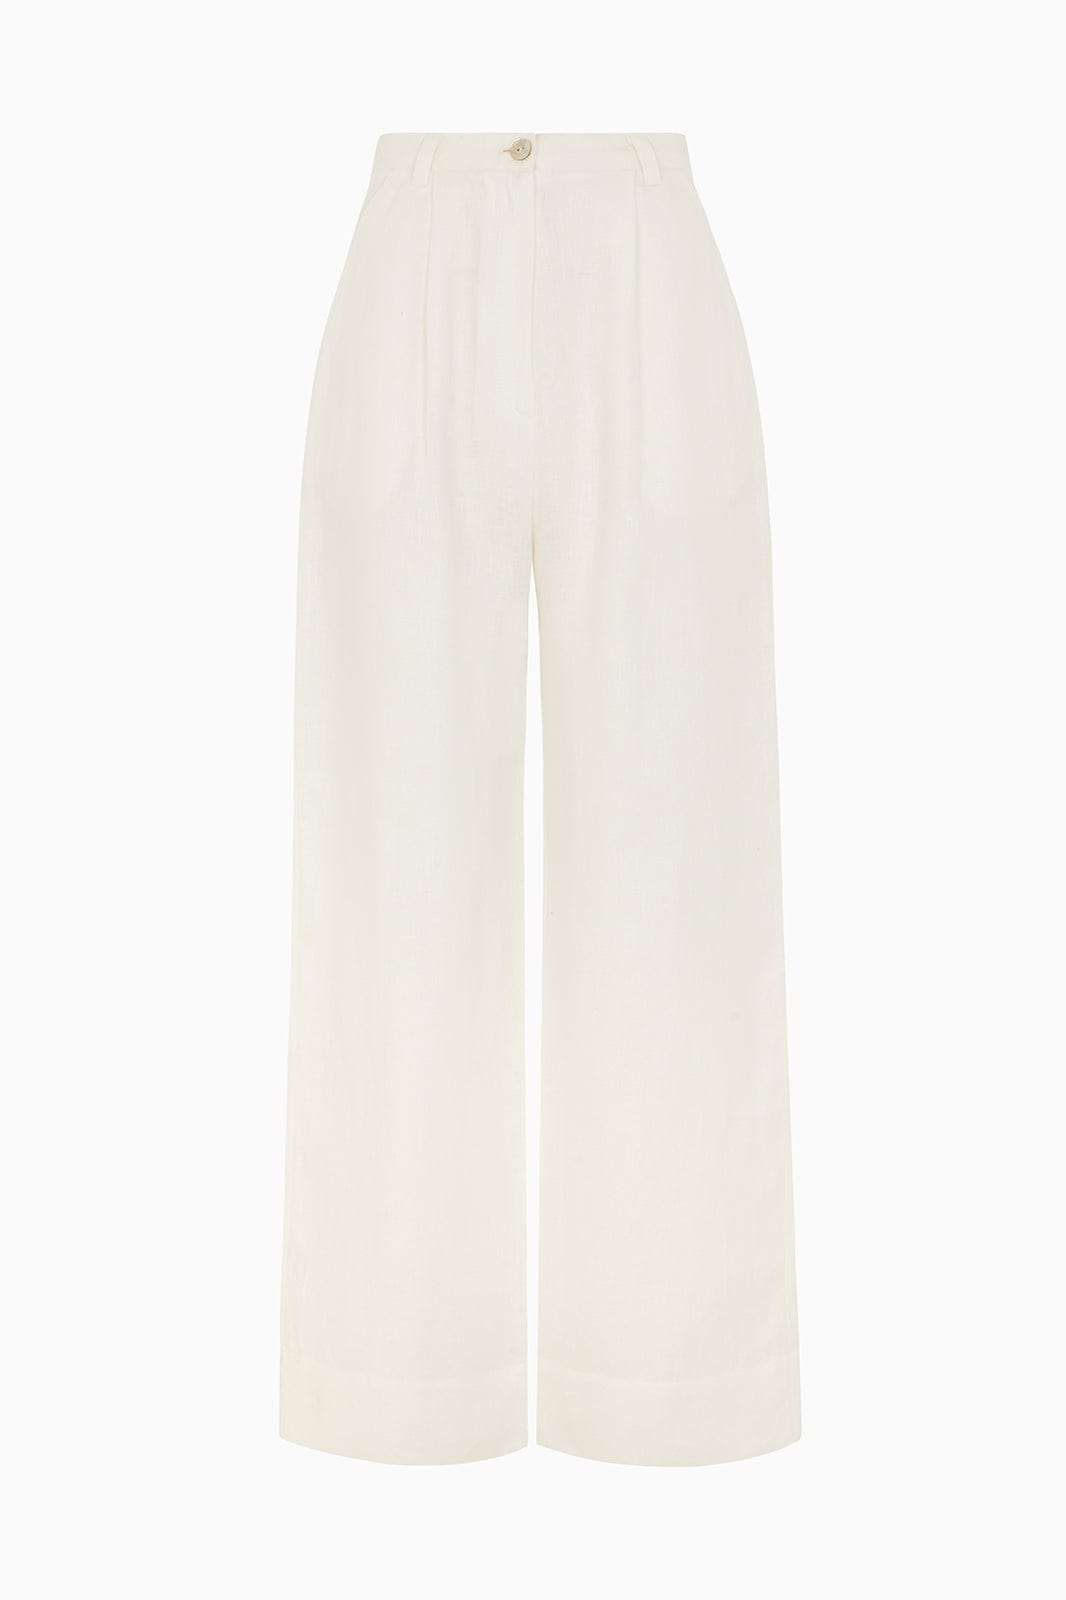 Off-White Pleated Pants Design by Originate at Pernia's Pop Up Shop 2024